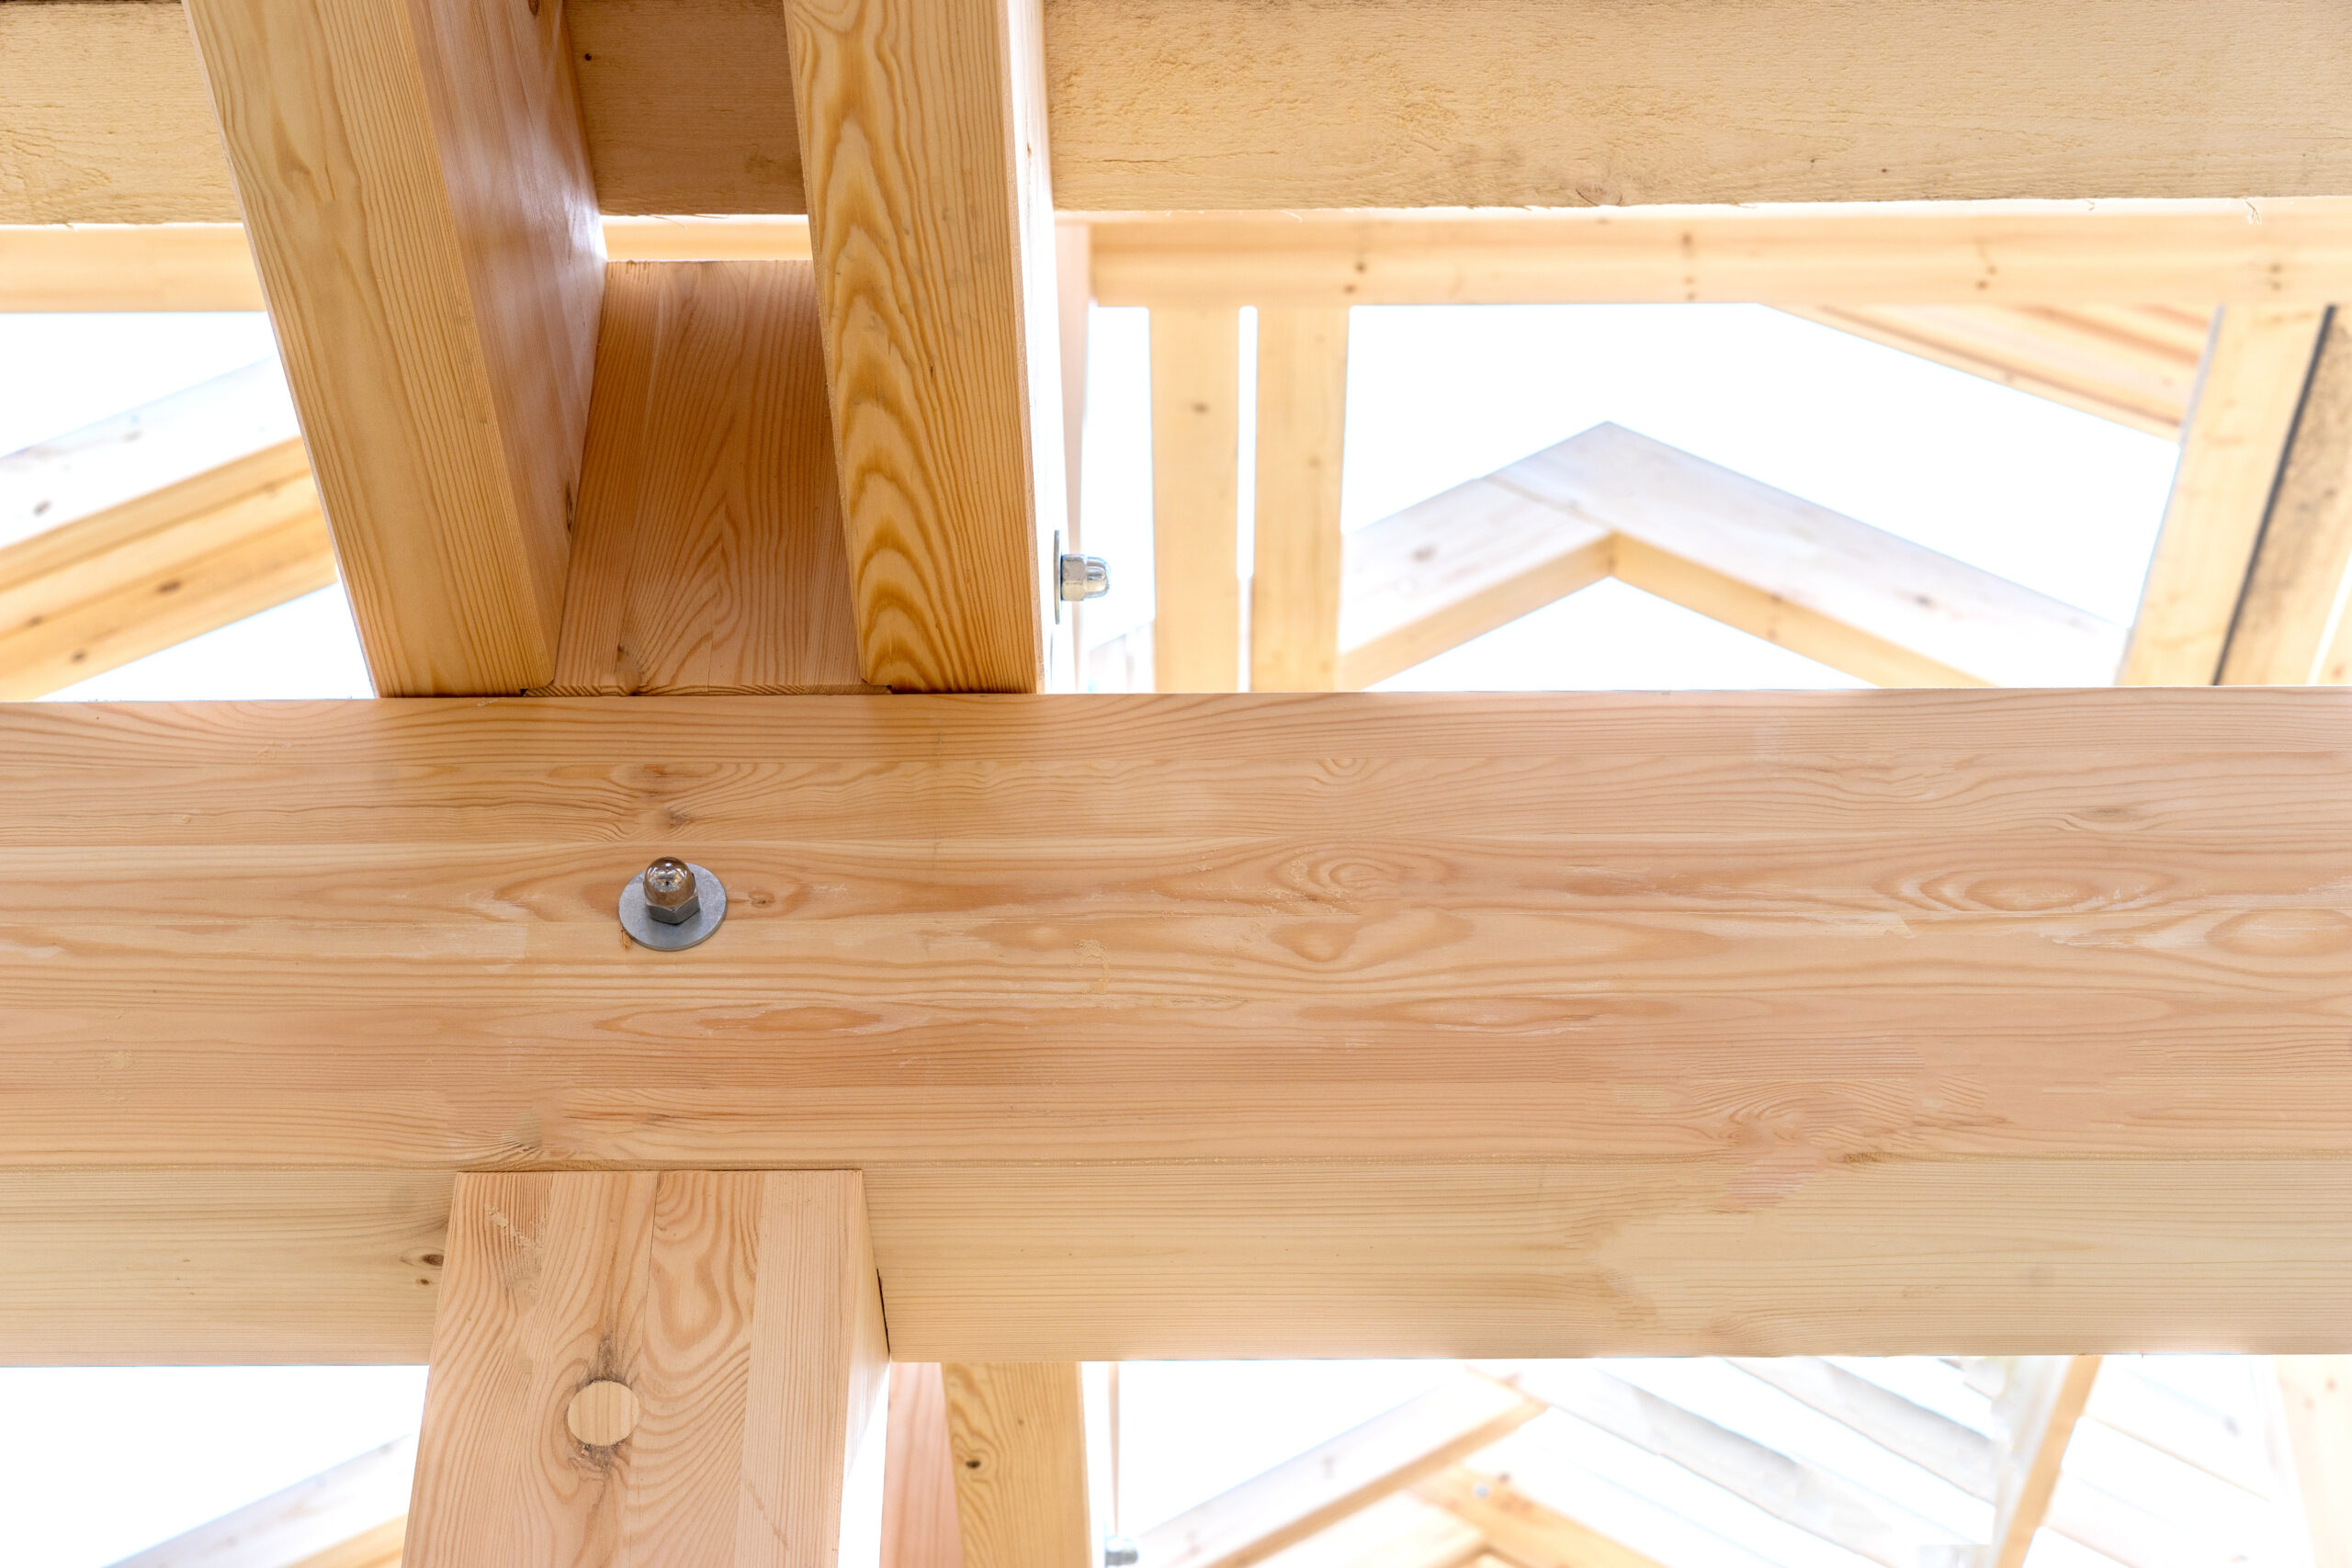 Fragment of a wooden house. Fastening of beams of a building. Fragment of building a house. Connections of wooden structures. Building concept.